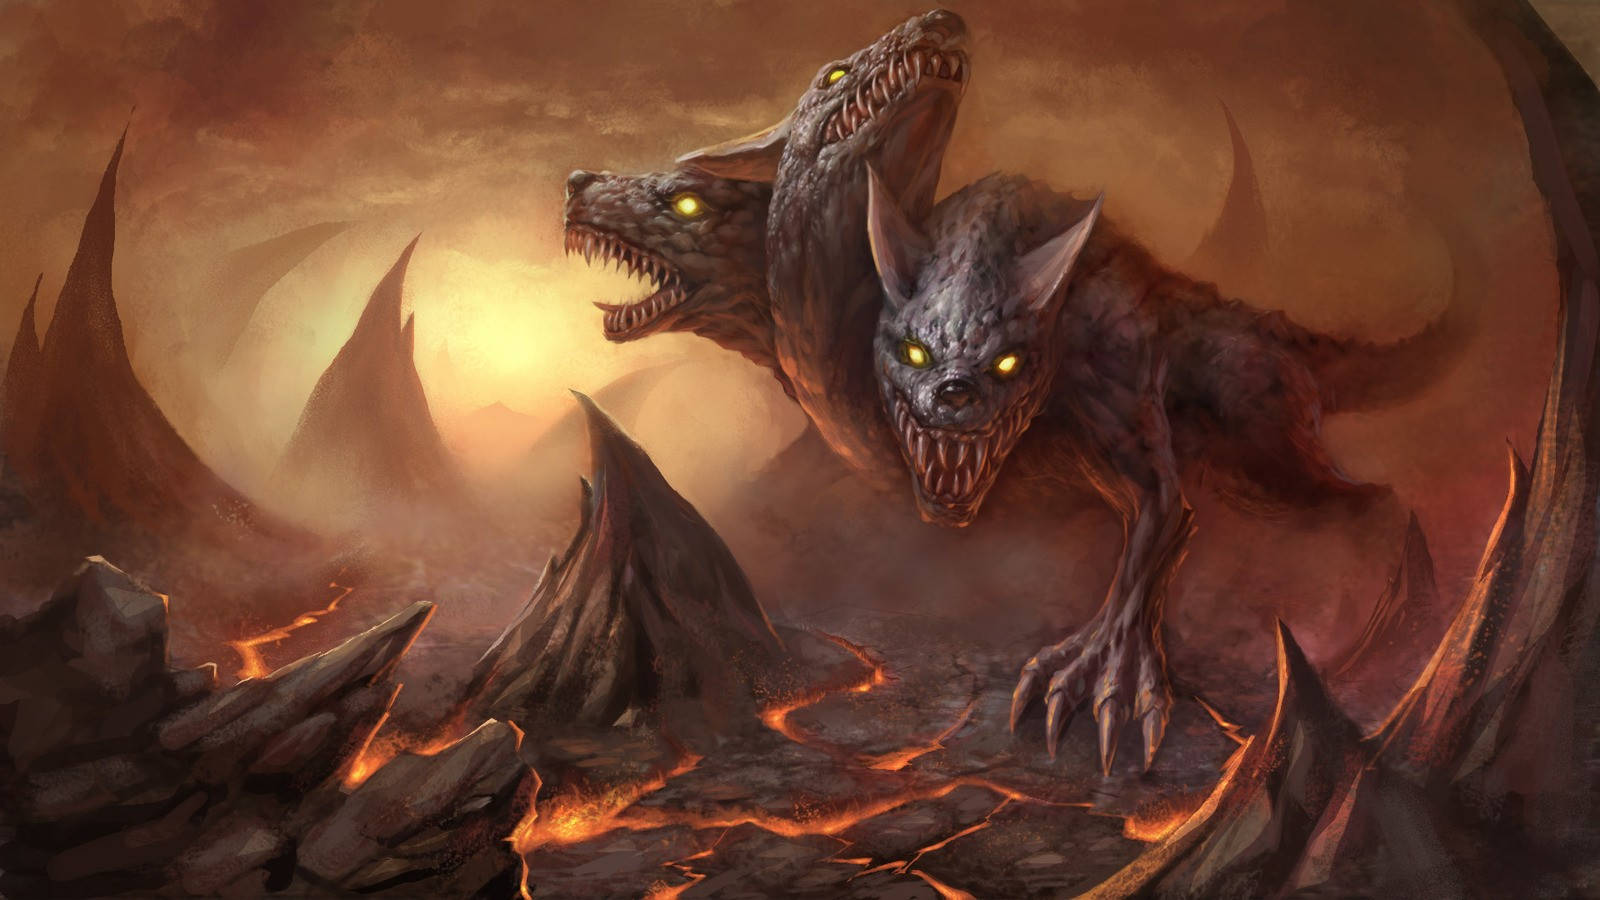 Top Cerberus Wallpapers Full Hd K Free To Use